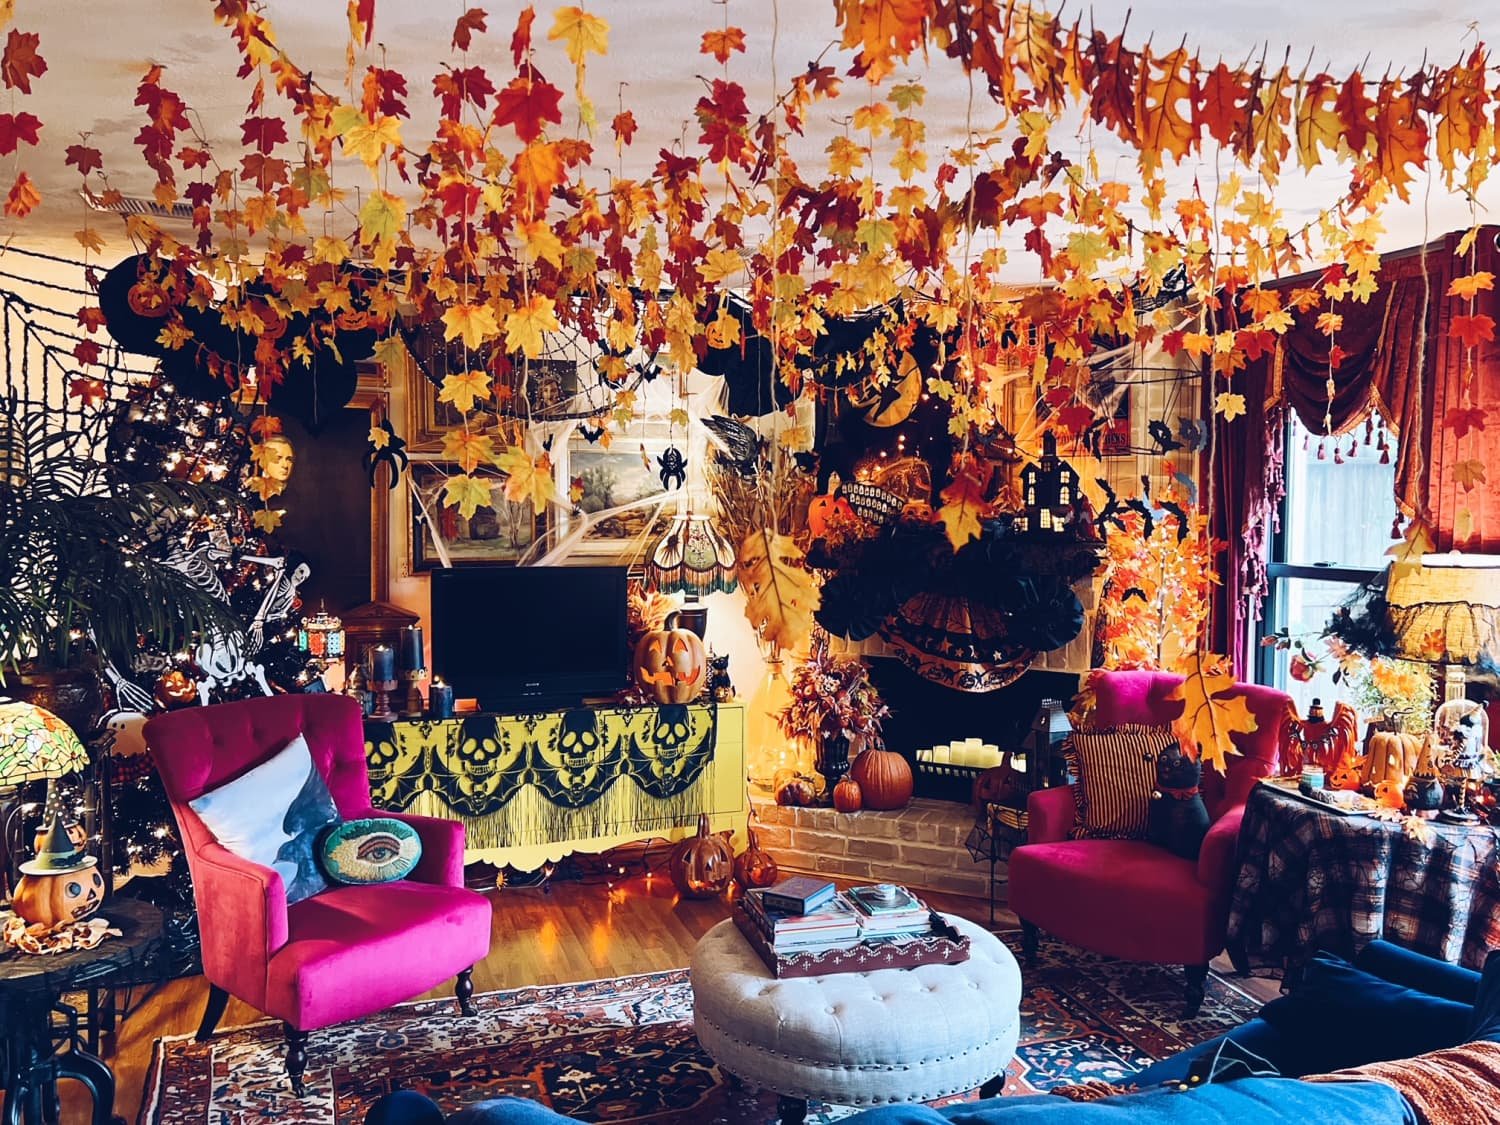 This Halloween-Ready Houston Home Has an Incredible DIY Headless Horseman Mural in the Dining Room You’ve Got to See